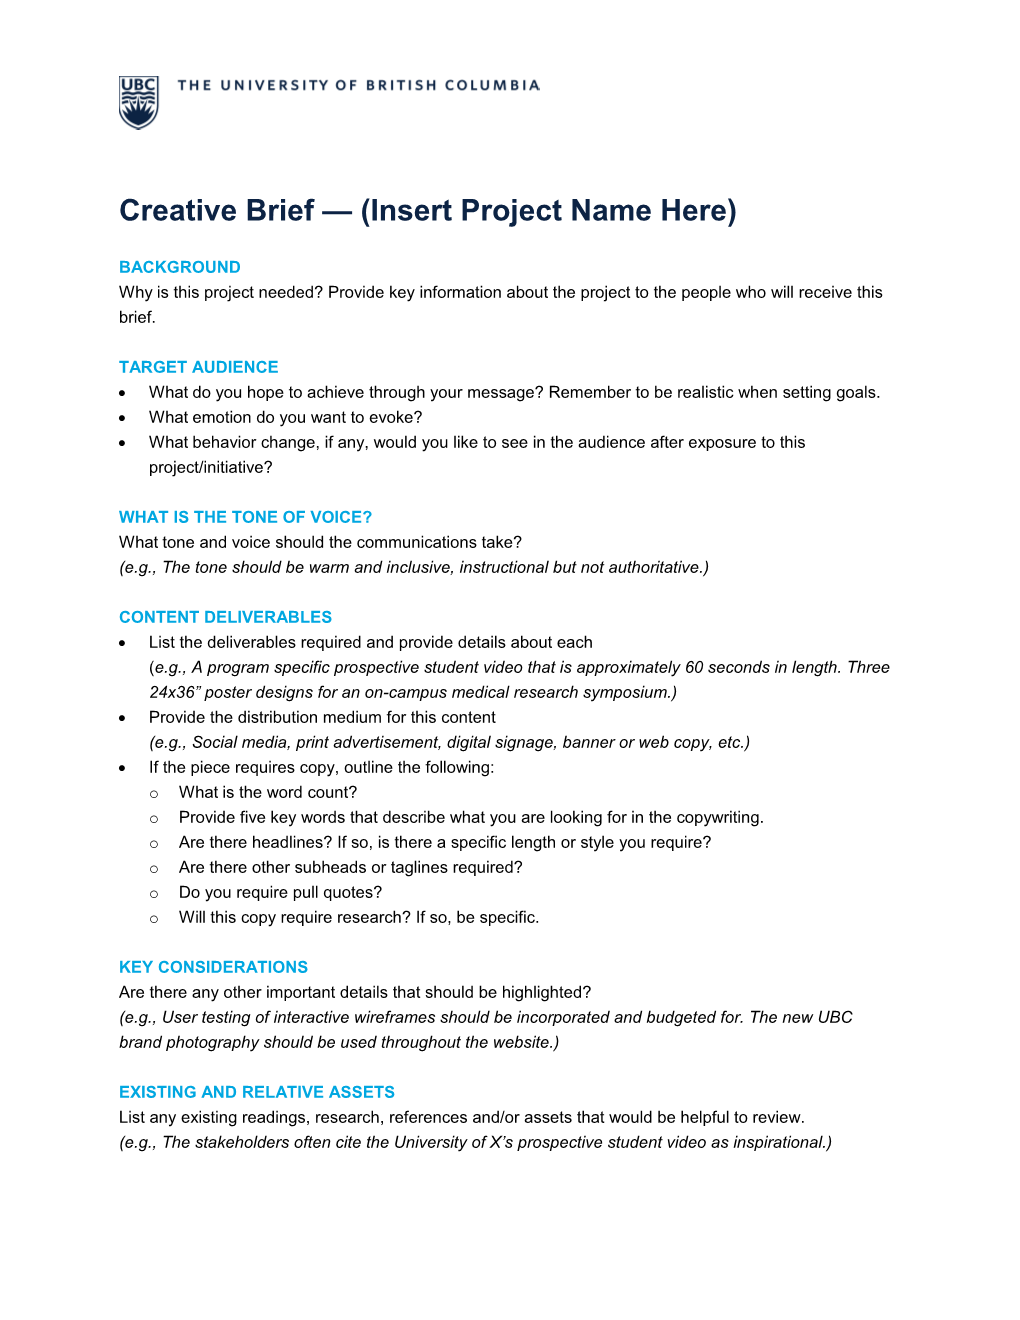 Creative Brief (Insert Project Name Here)